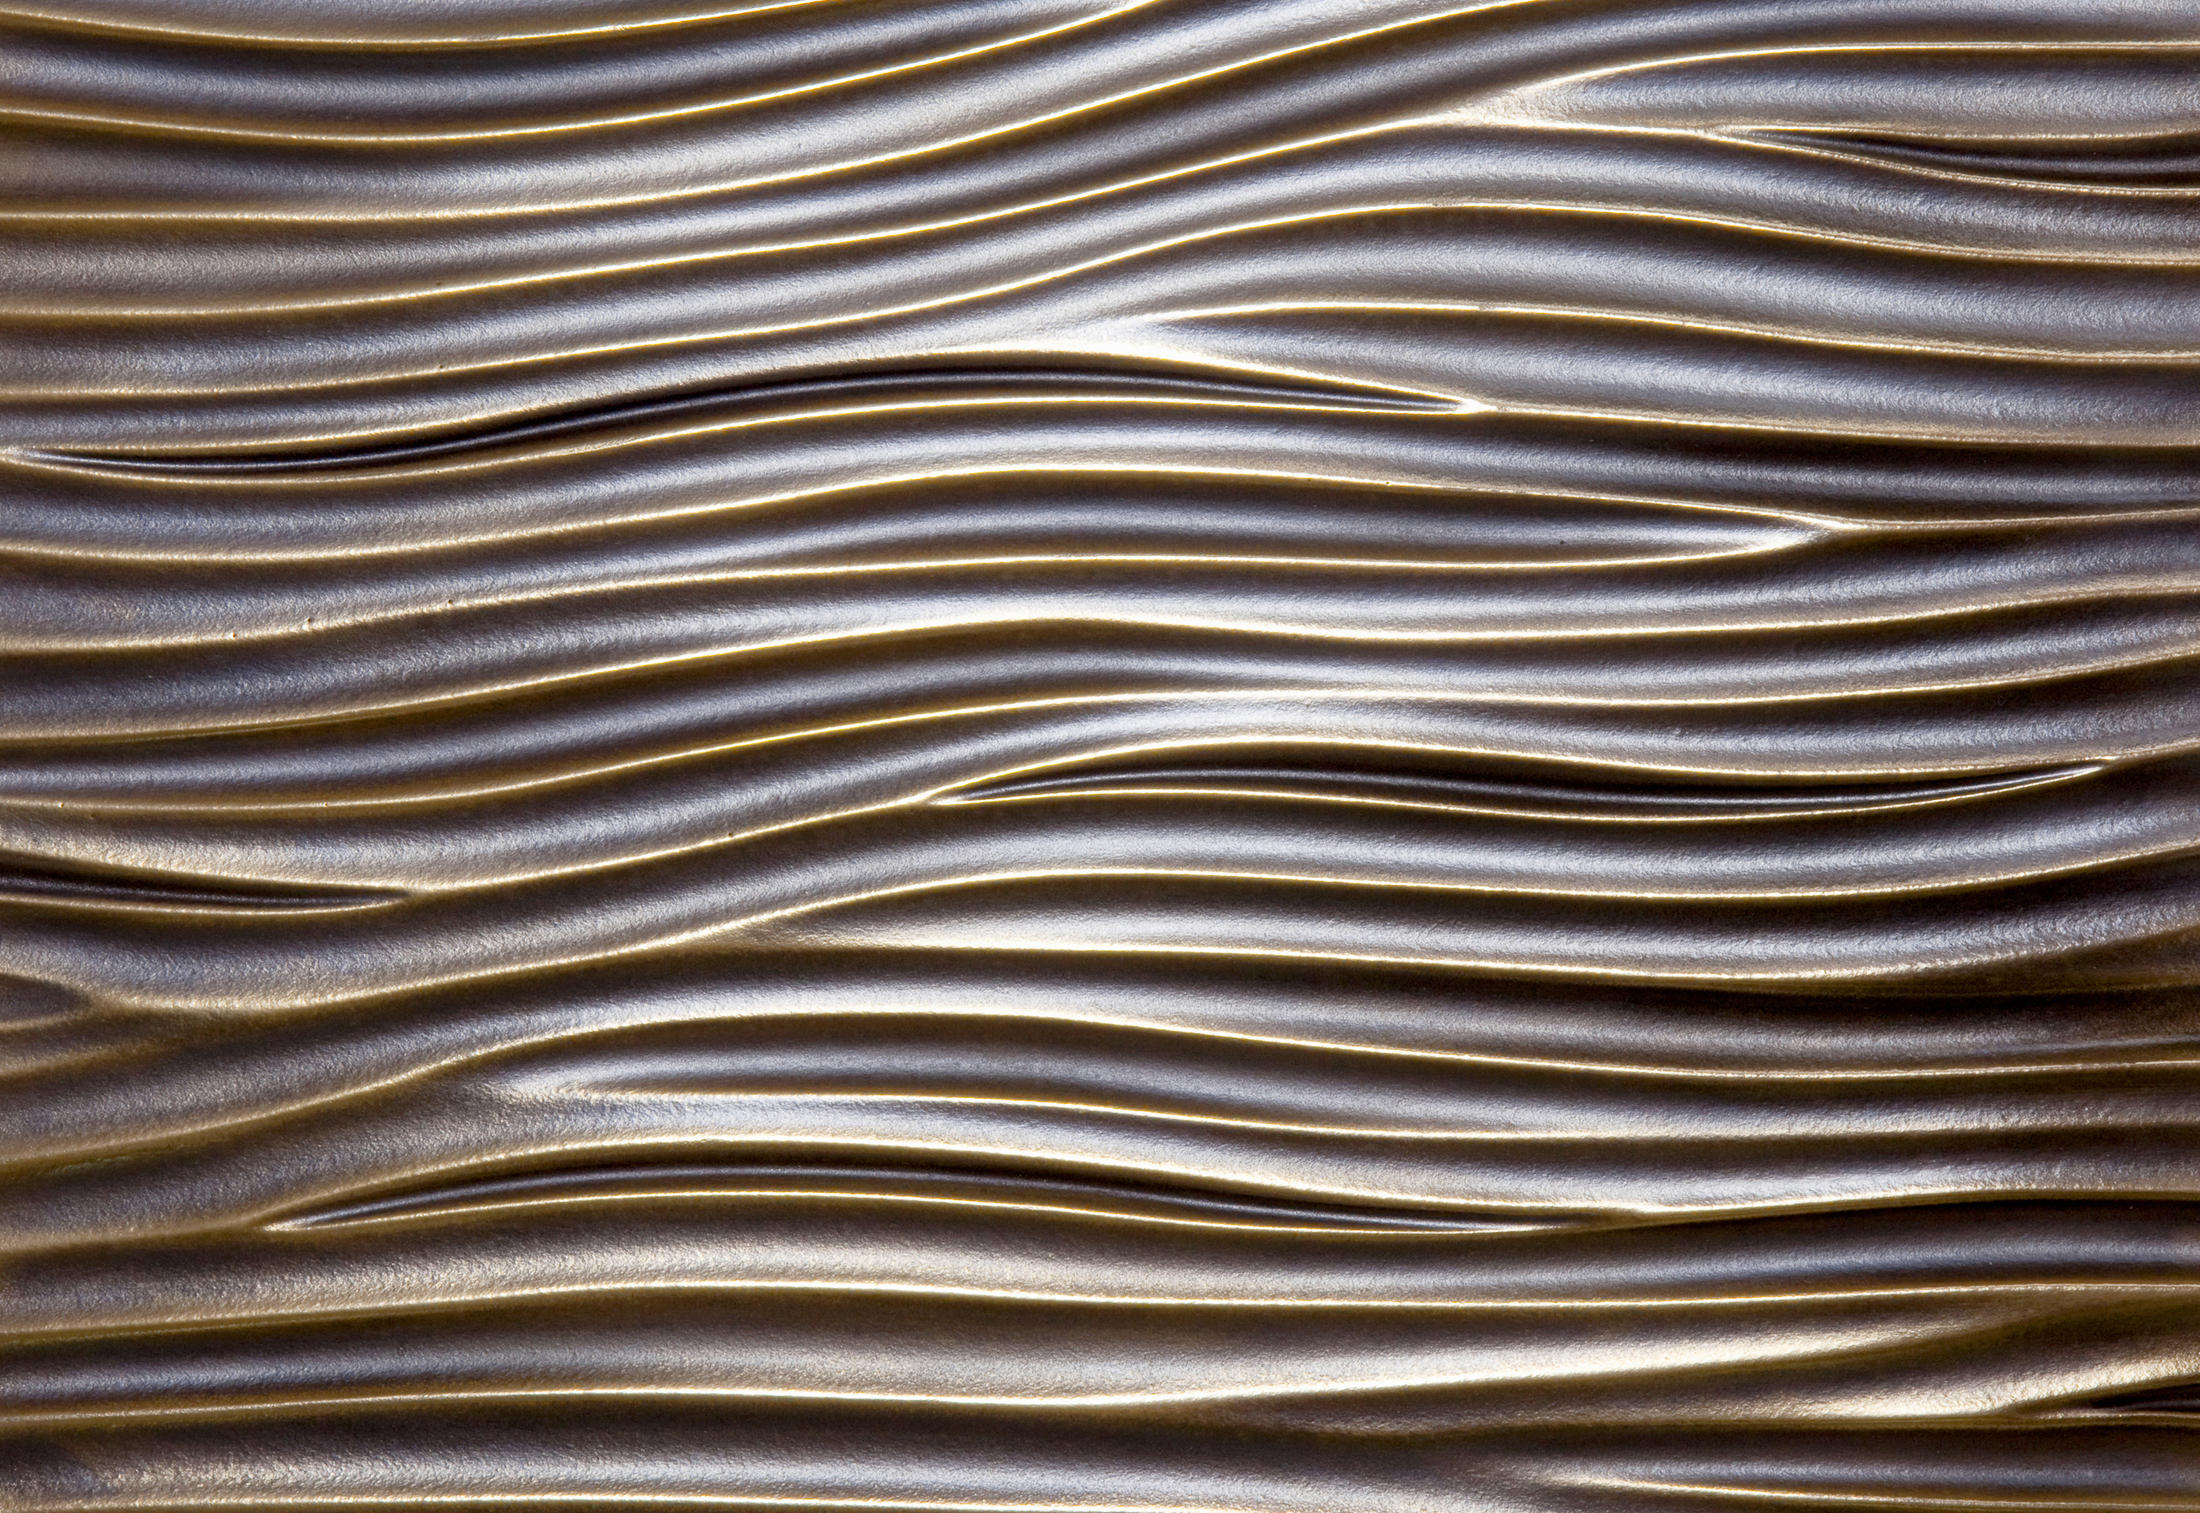 TEXTURE | SHORT WAVE 01 - Sheets from VEROB | Architonic